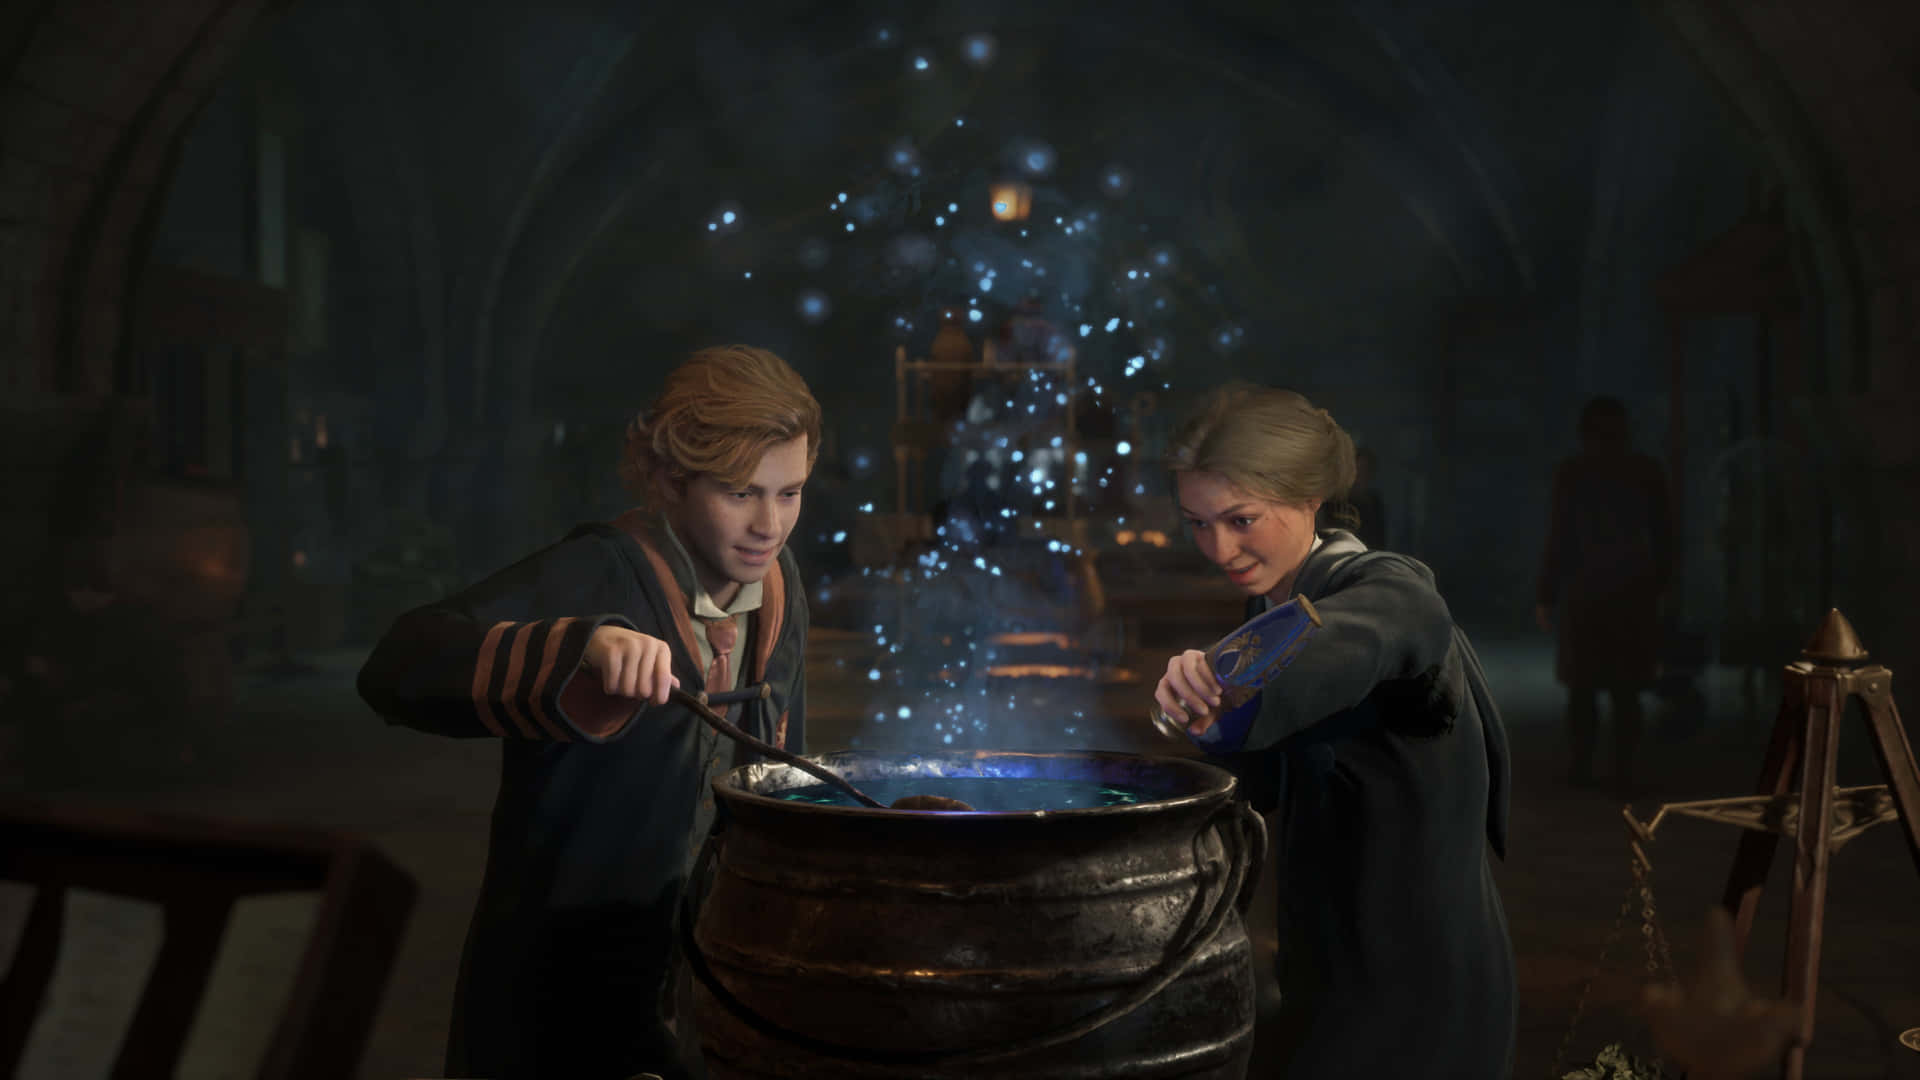 "The Hogwarts Potions Class provides students with the workshops and resources to become a wizard's apprentice." Wallpaper